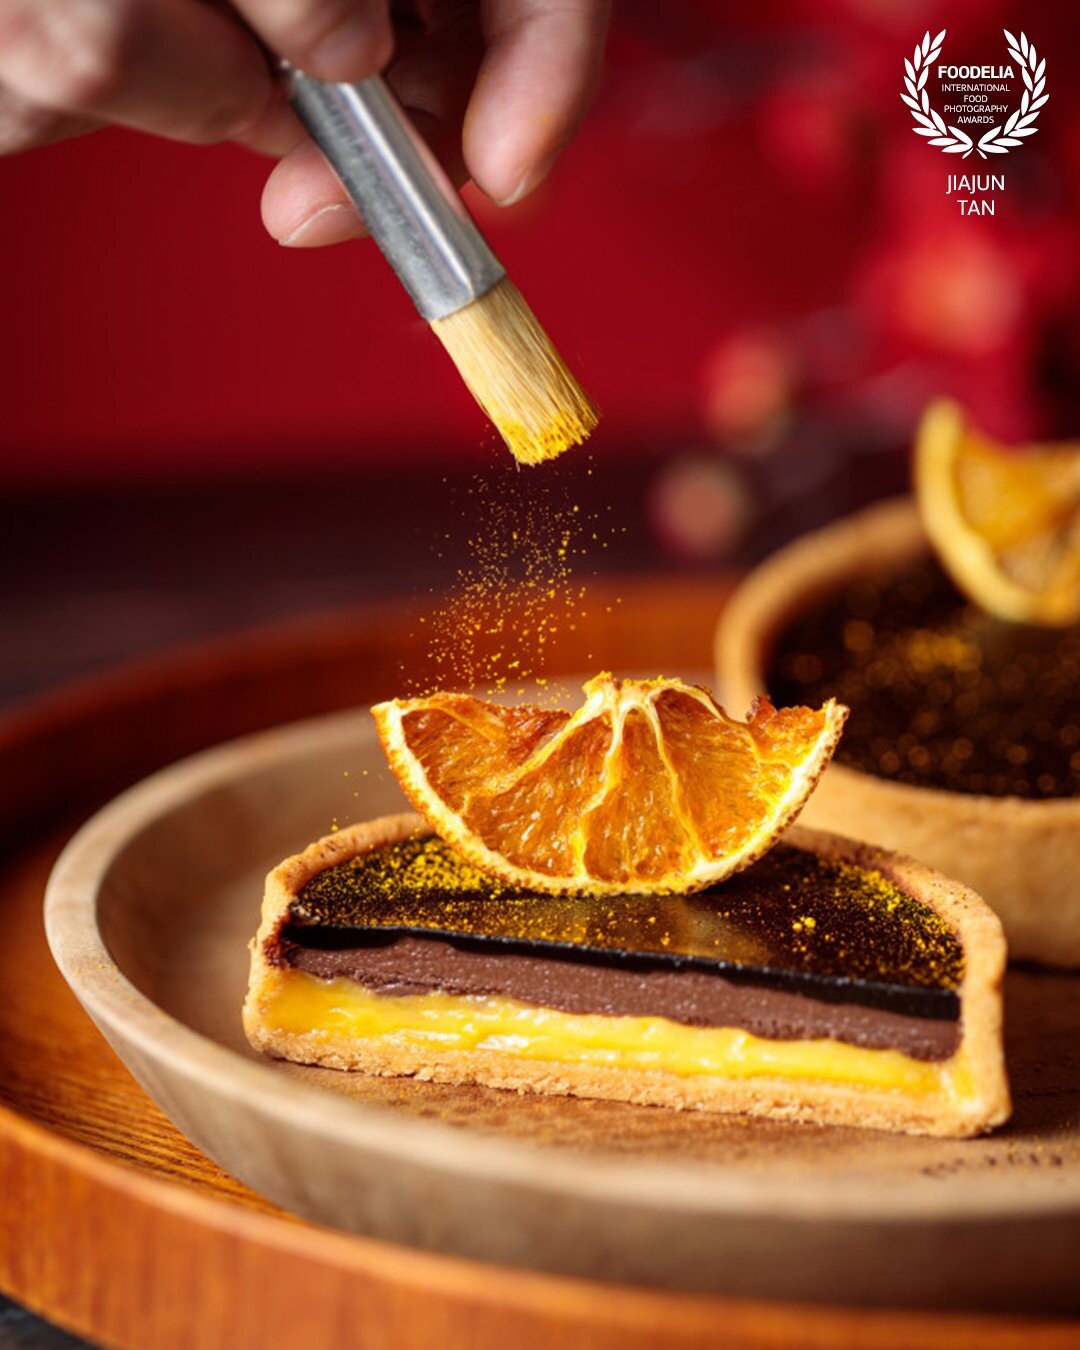 Stunning Orange Chocolate Tart from Tanamera Coffee Singapore.<br />
<br />
Milk chocolate filling, orange custard and dark chocolate ganache encrusted in cookie shell with a little touch of magical golden powder.<br />
<br />
Photographer:@jsquaree | @sparkstudio.co<br />
Cilent: @tanameracoffeesg